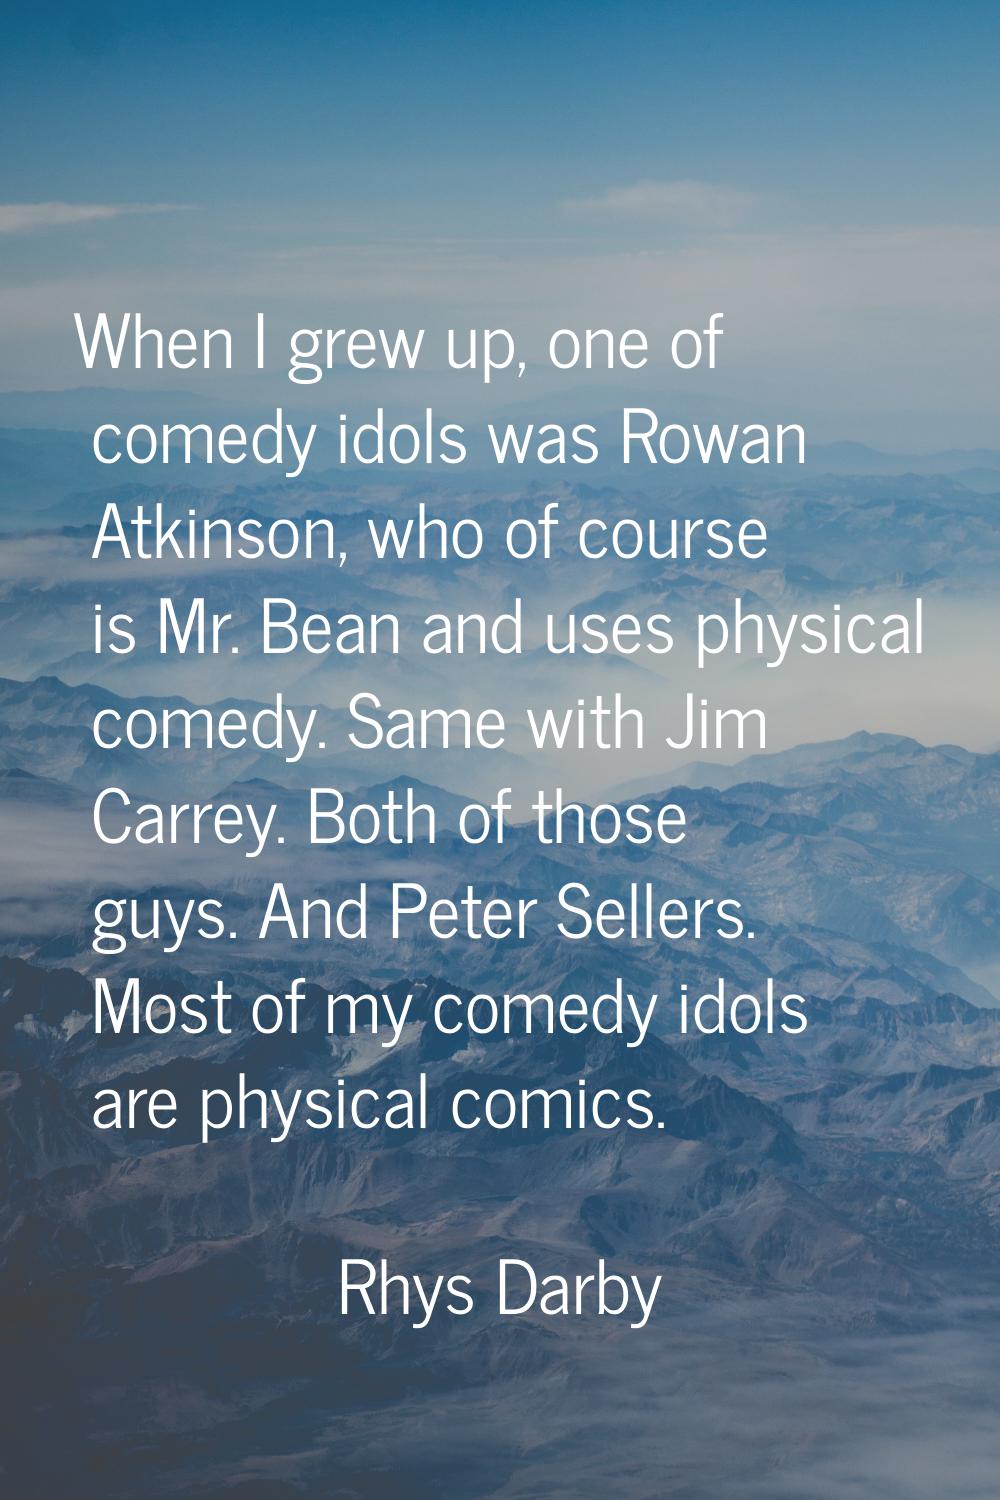 When I grew up, one of comedy idols was Rowan Atkinson, who of course is Mr. Bean and uses physical